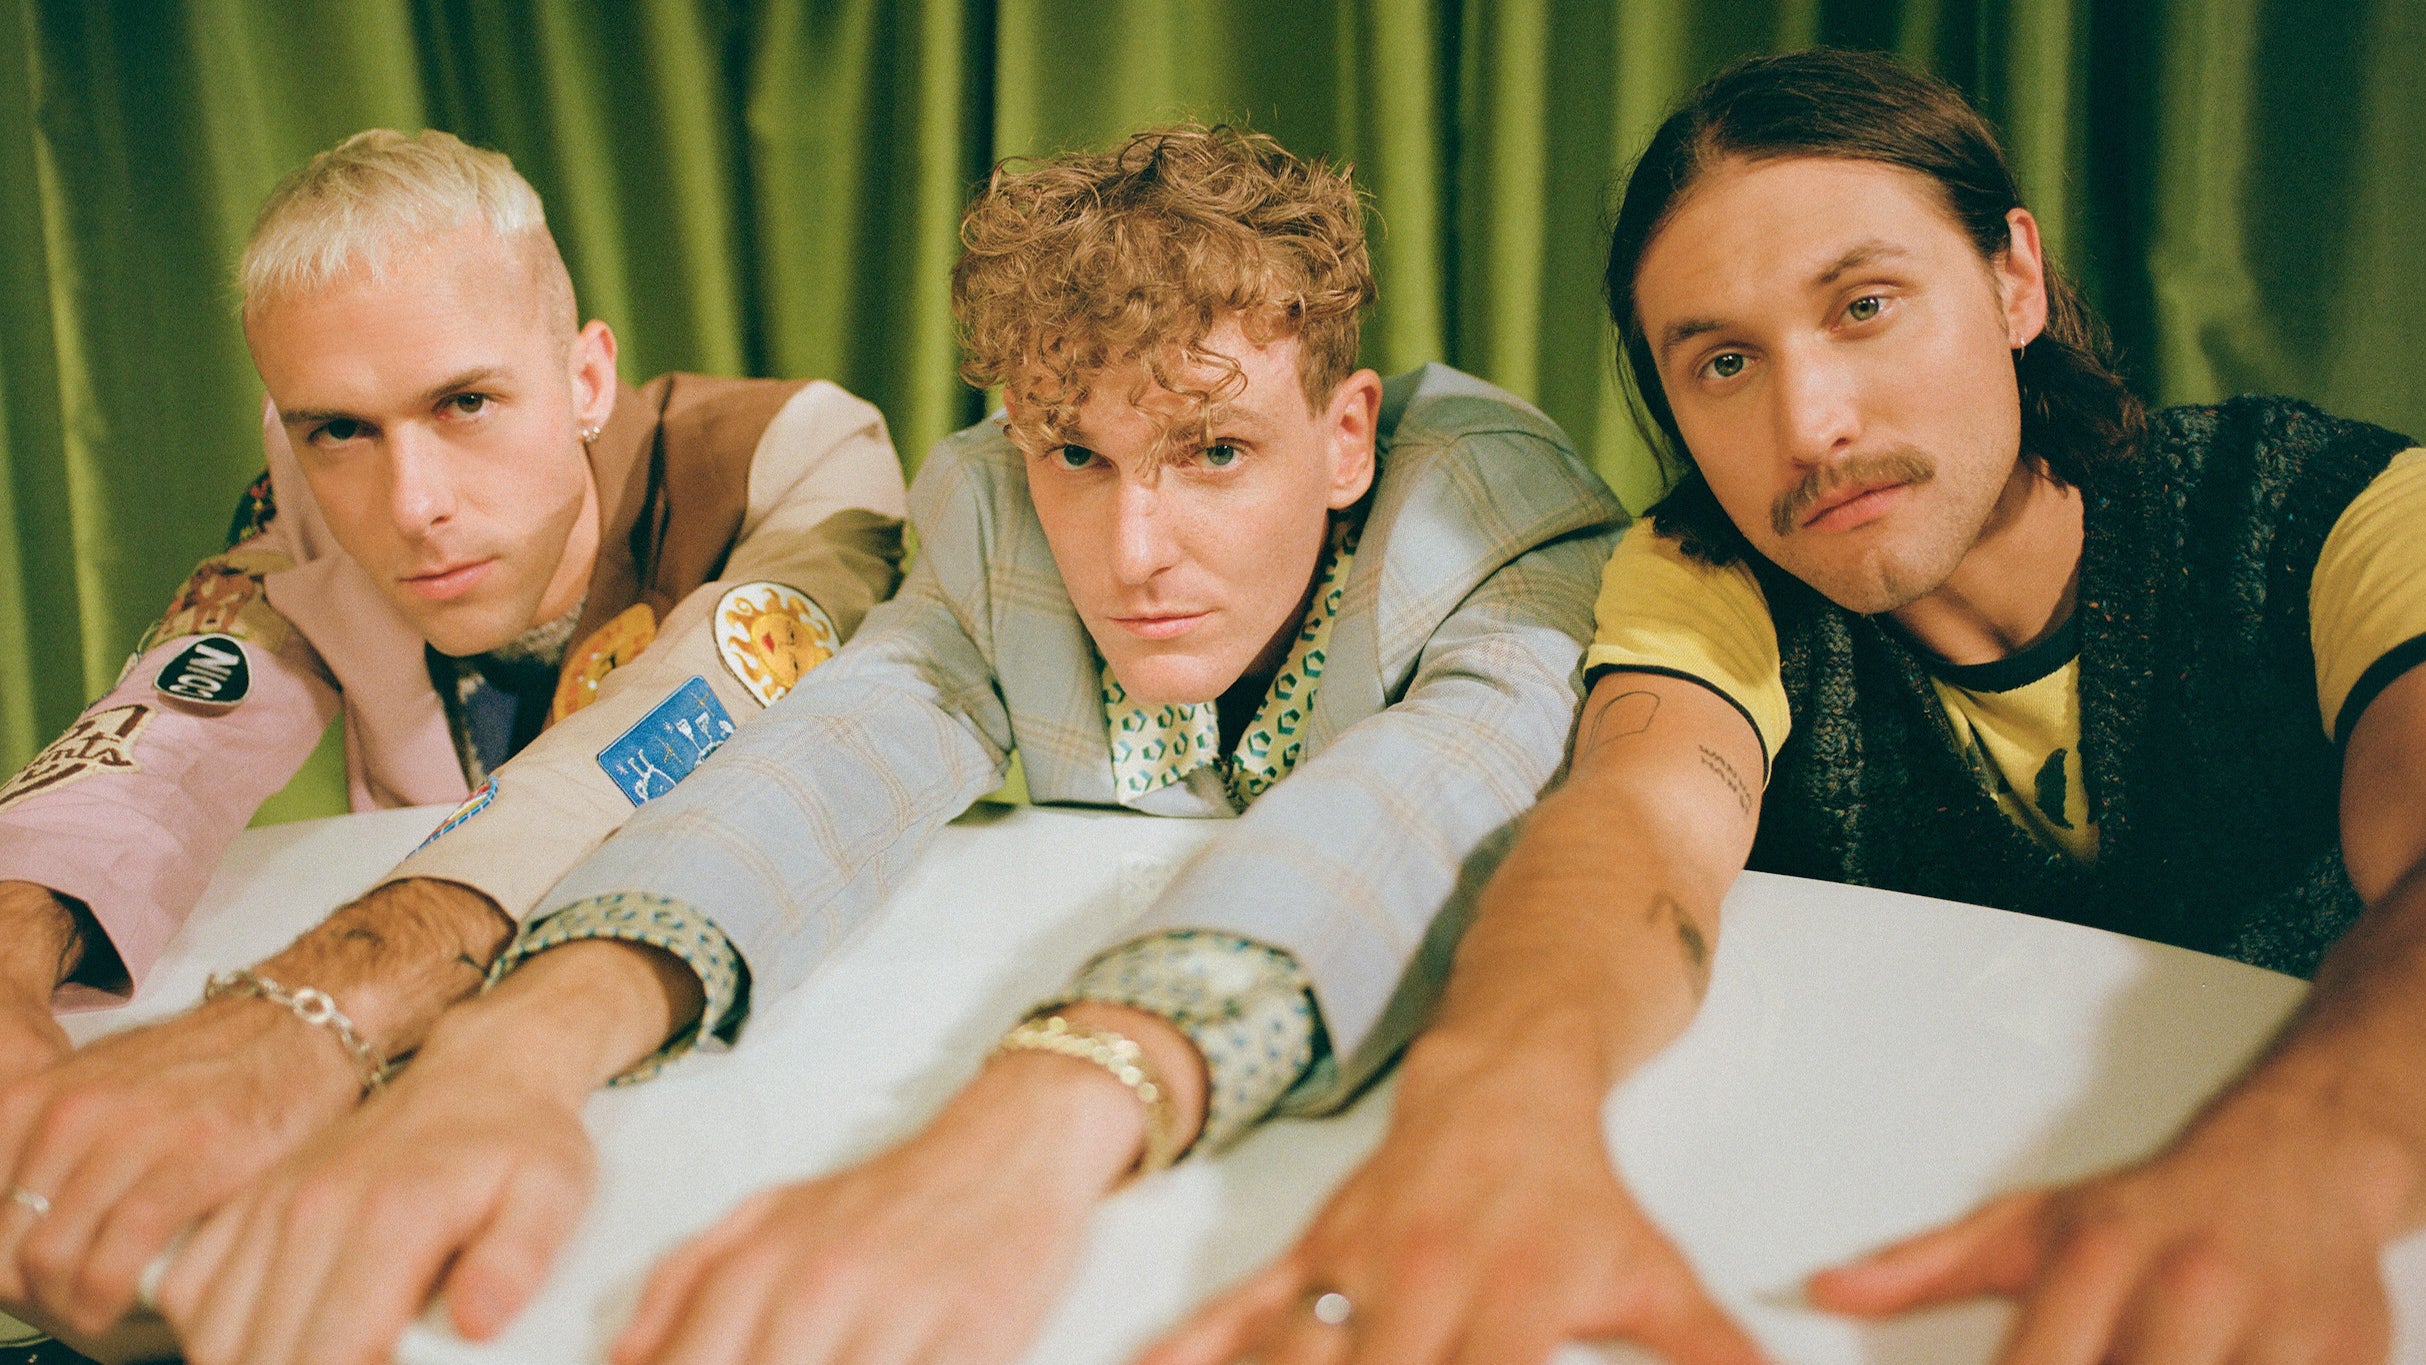 COIN: Uncanny Valley Tour at Hollywood Palladium